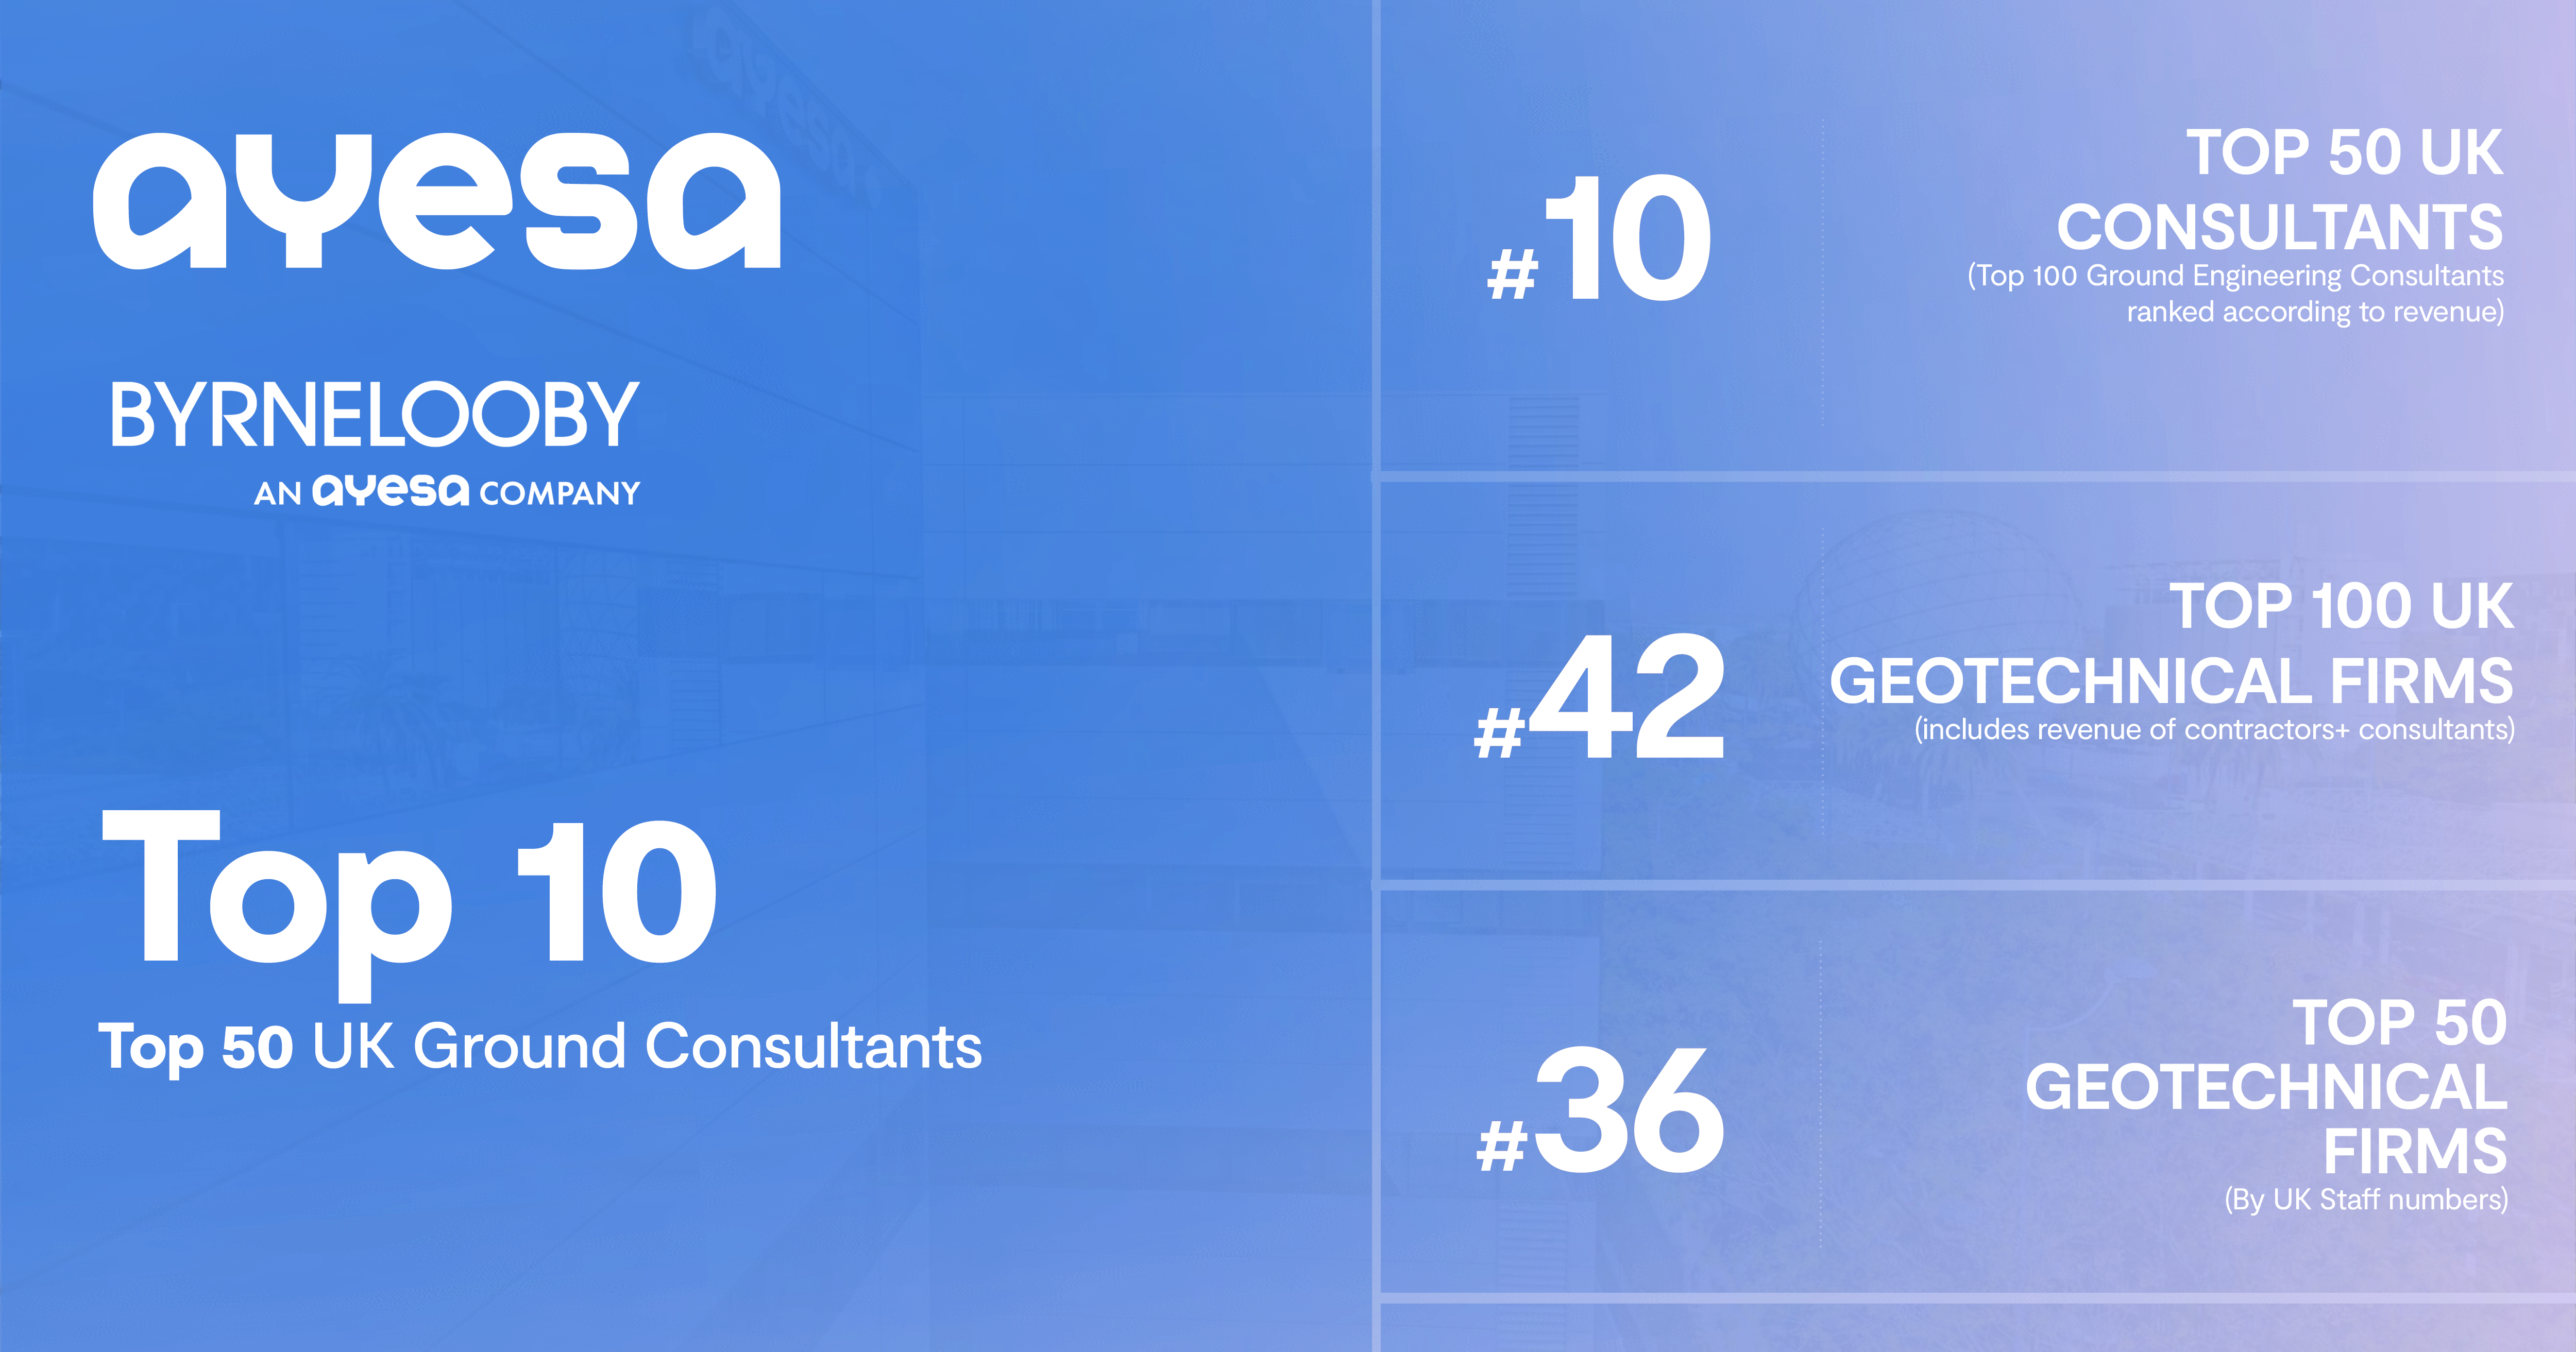 Ranked in the Top 10 of Top 50 UK Ground Consultants for a second year in a row